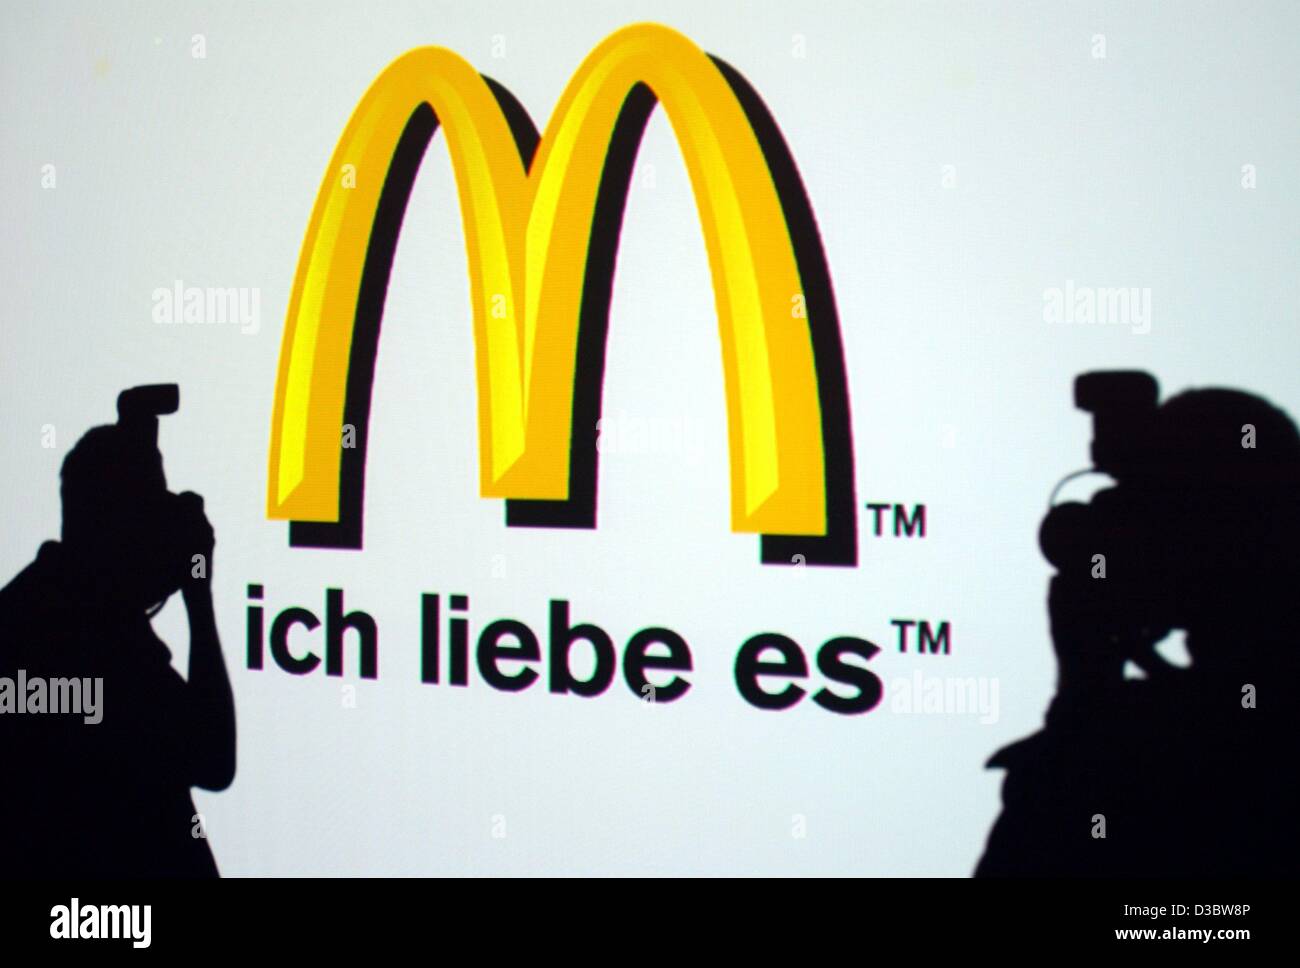 (dpa) - Two journalists take a photo of the new logo of the fast food chain McDonald's during a press conference in Munich, 2 September 2003. The slogan 'ich liebe es' ('i'm lovin' it') will soon make its way into the vocabulary of McDonald's customers in more than 100 countries as the Golden Arches Stock Photo